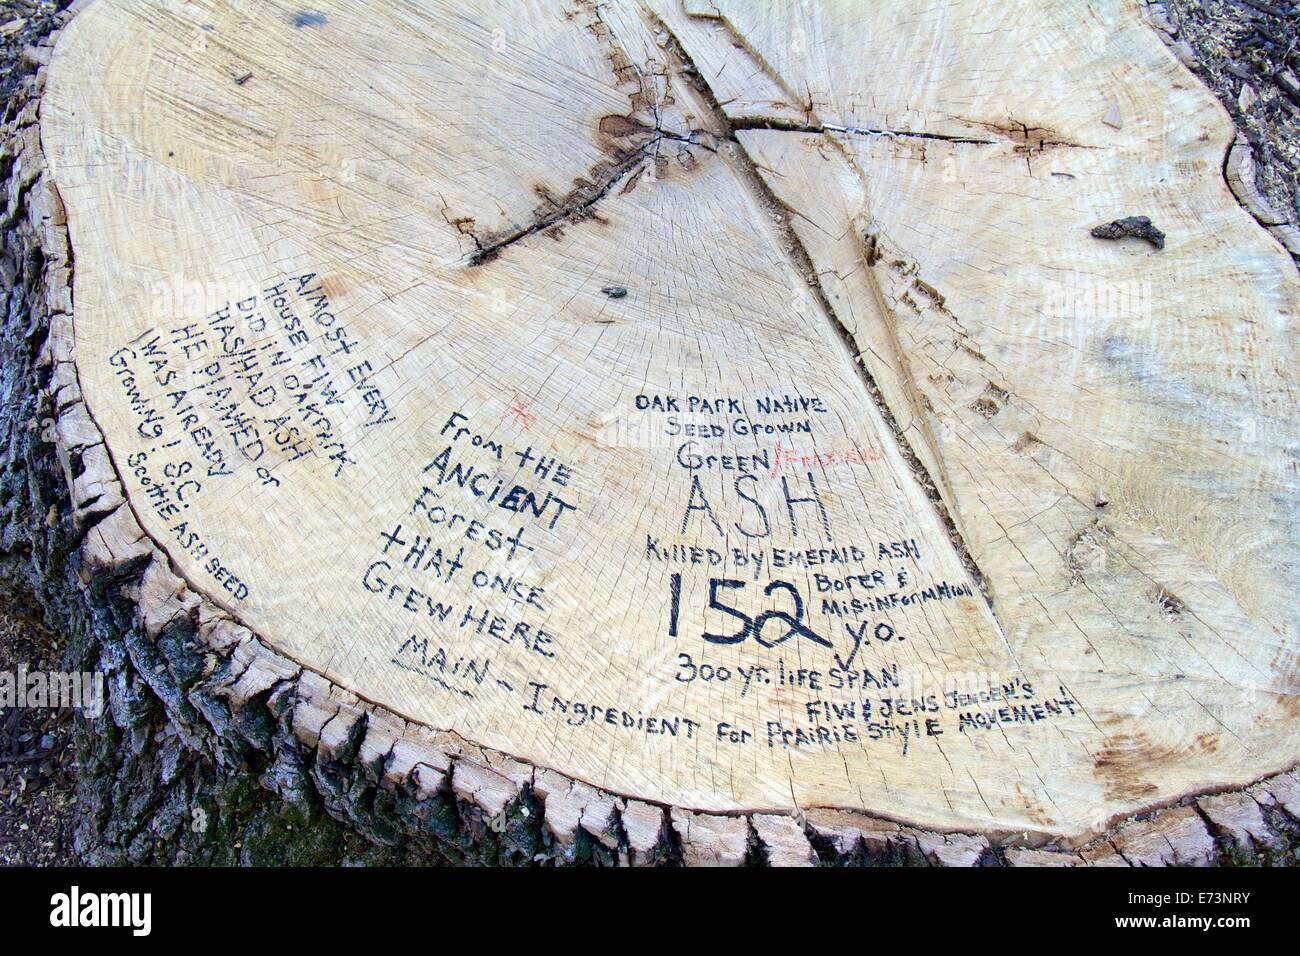 Stump of 152 year old green ash killed by emerald ash borer. Historic nature of ash trees place on tree with marker pen. Stock Photo